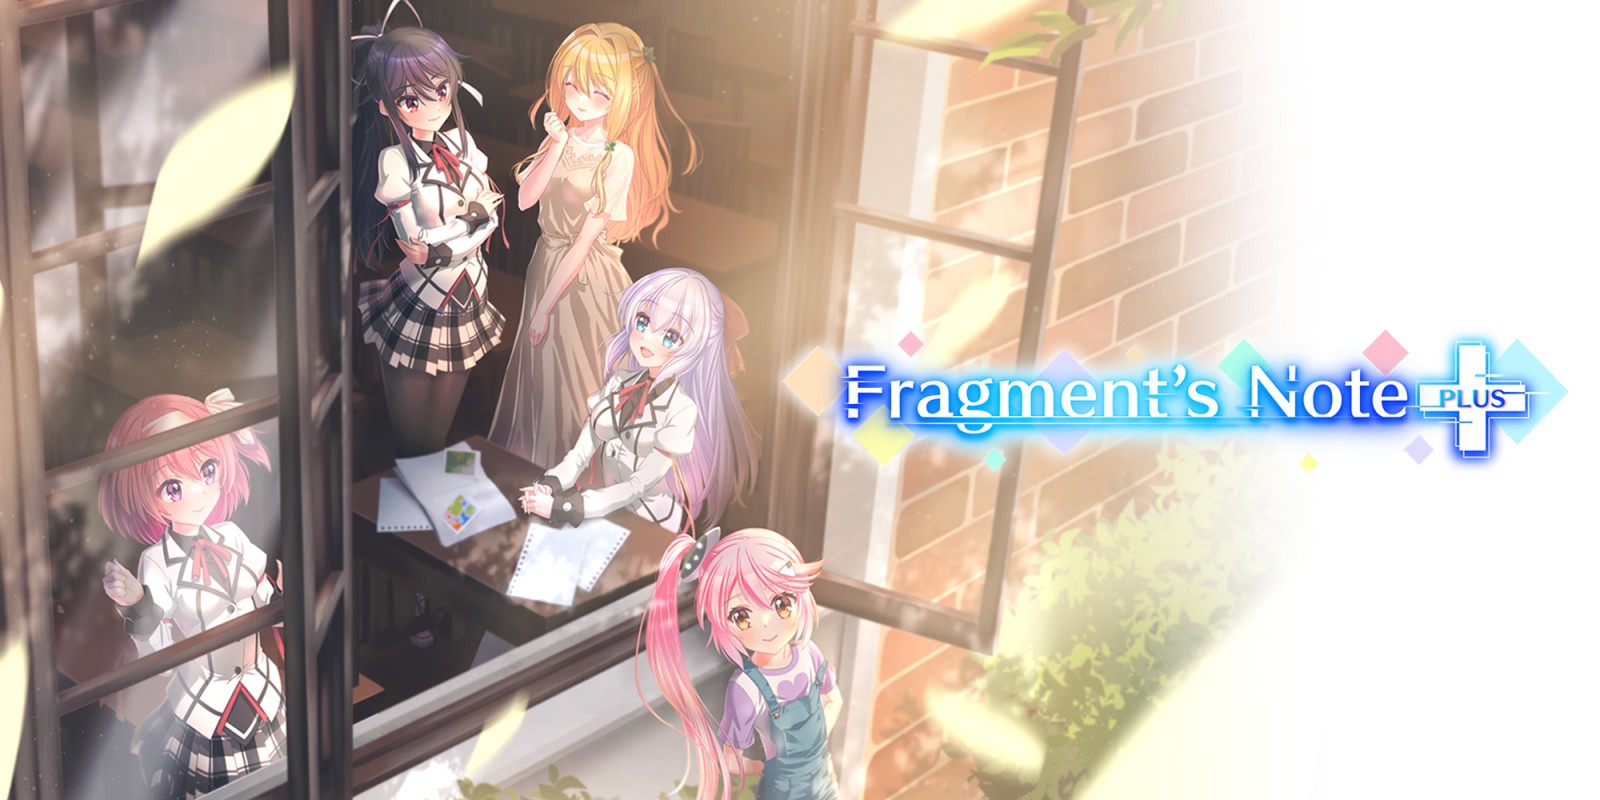 Fragment's Note+